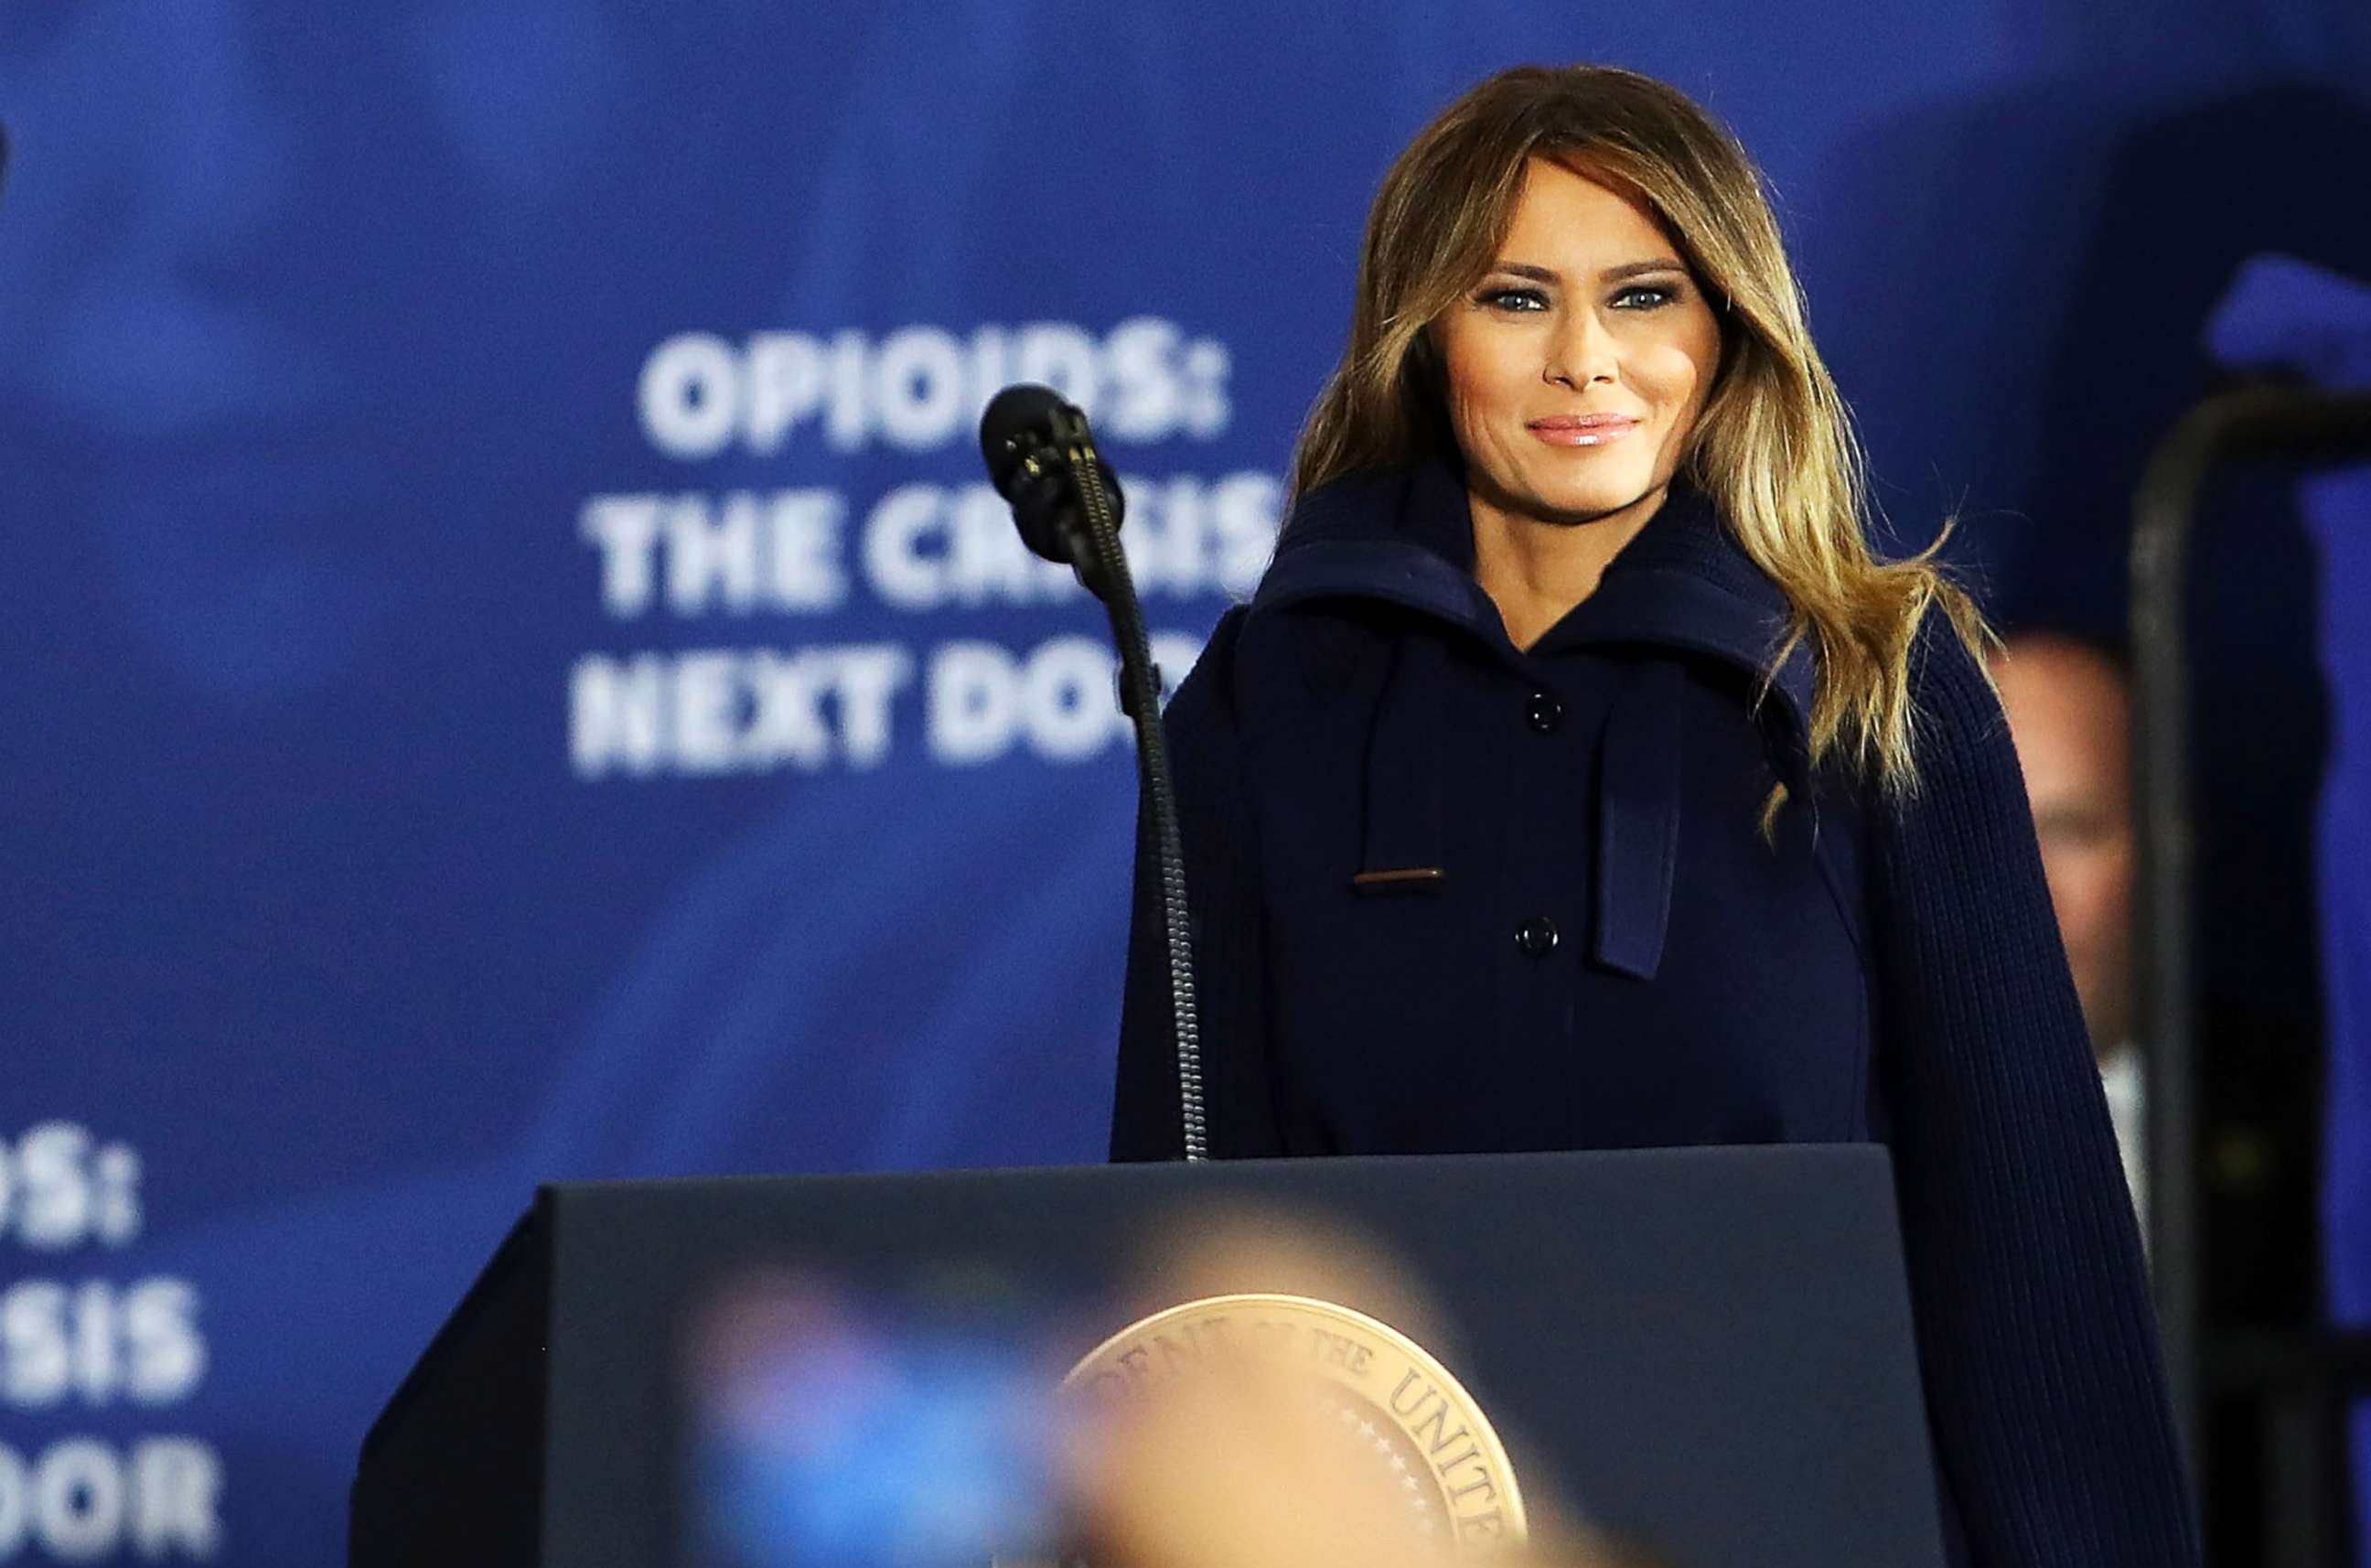 PHOTO: First lady Melania Trump walks onto the stage to introduce her husband and to speak about opioids at an event at Manchester Community College on March 19, 2018 in Manchester, N.H.